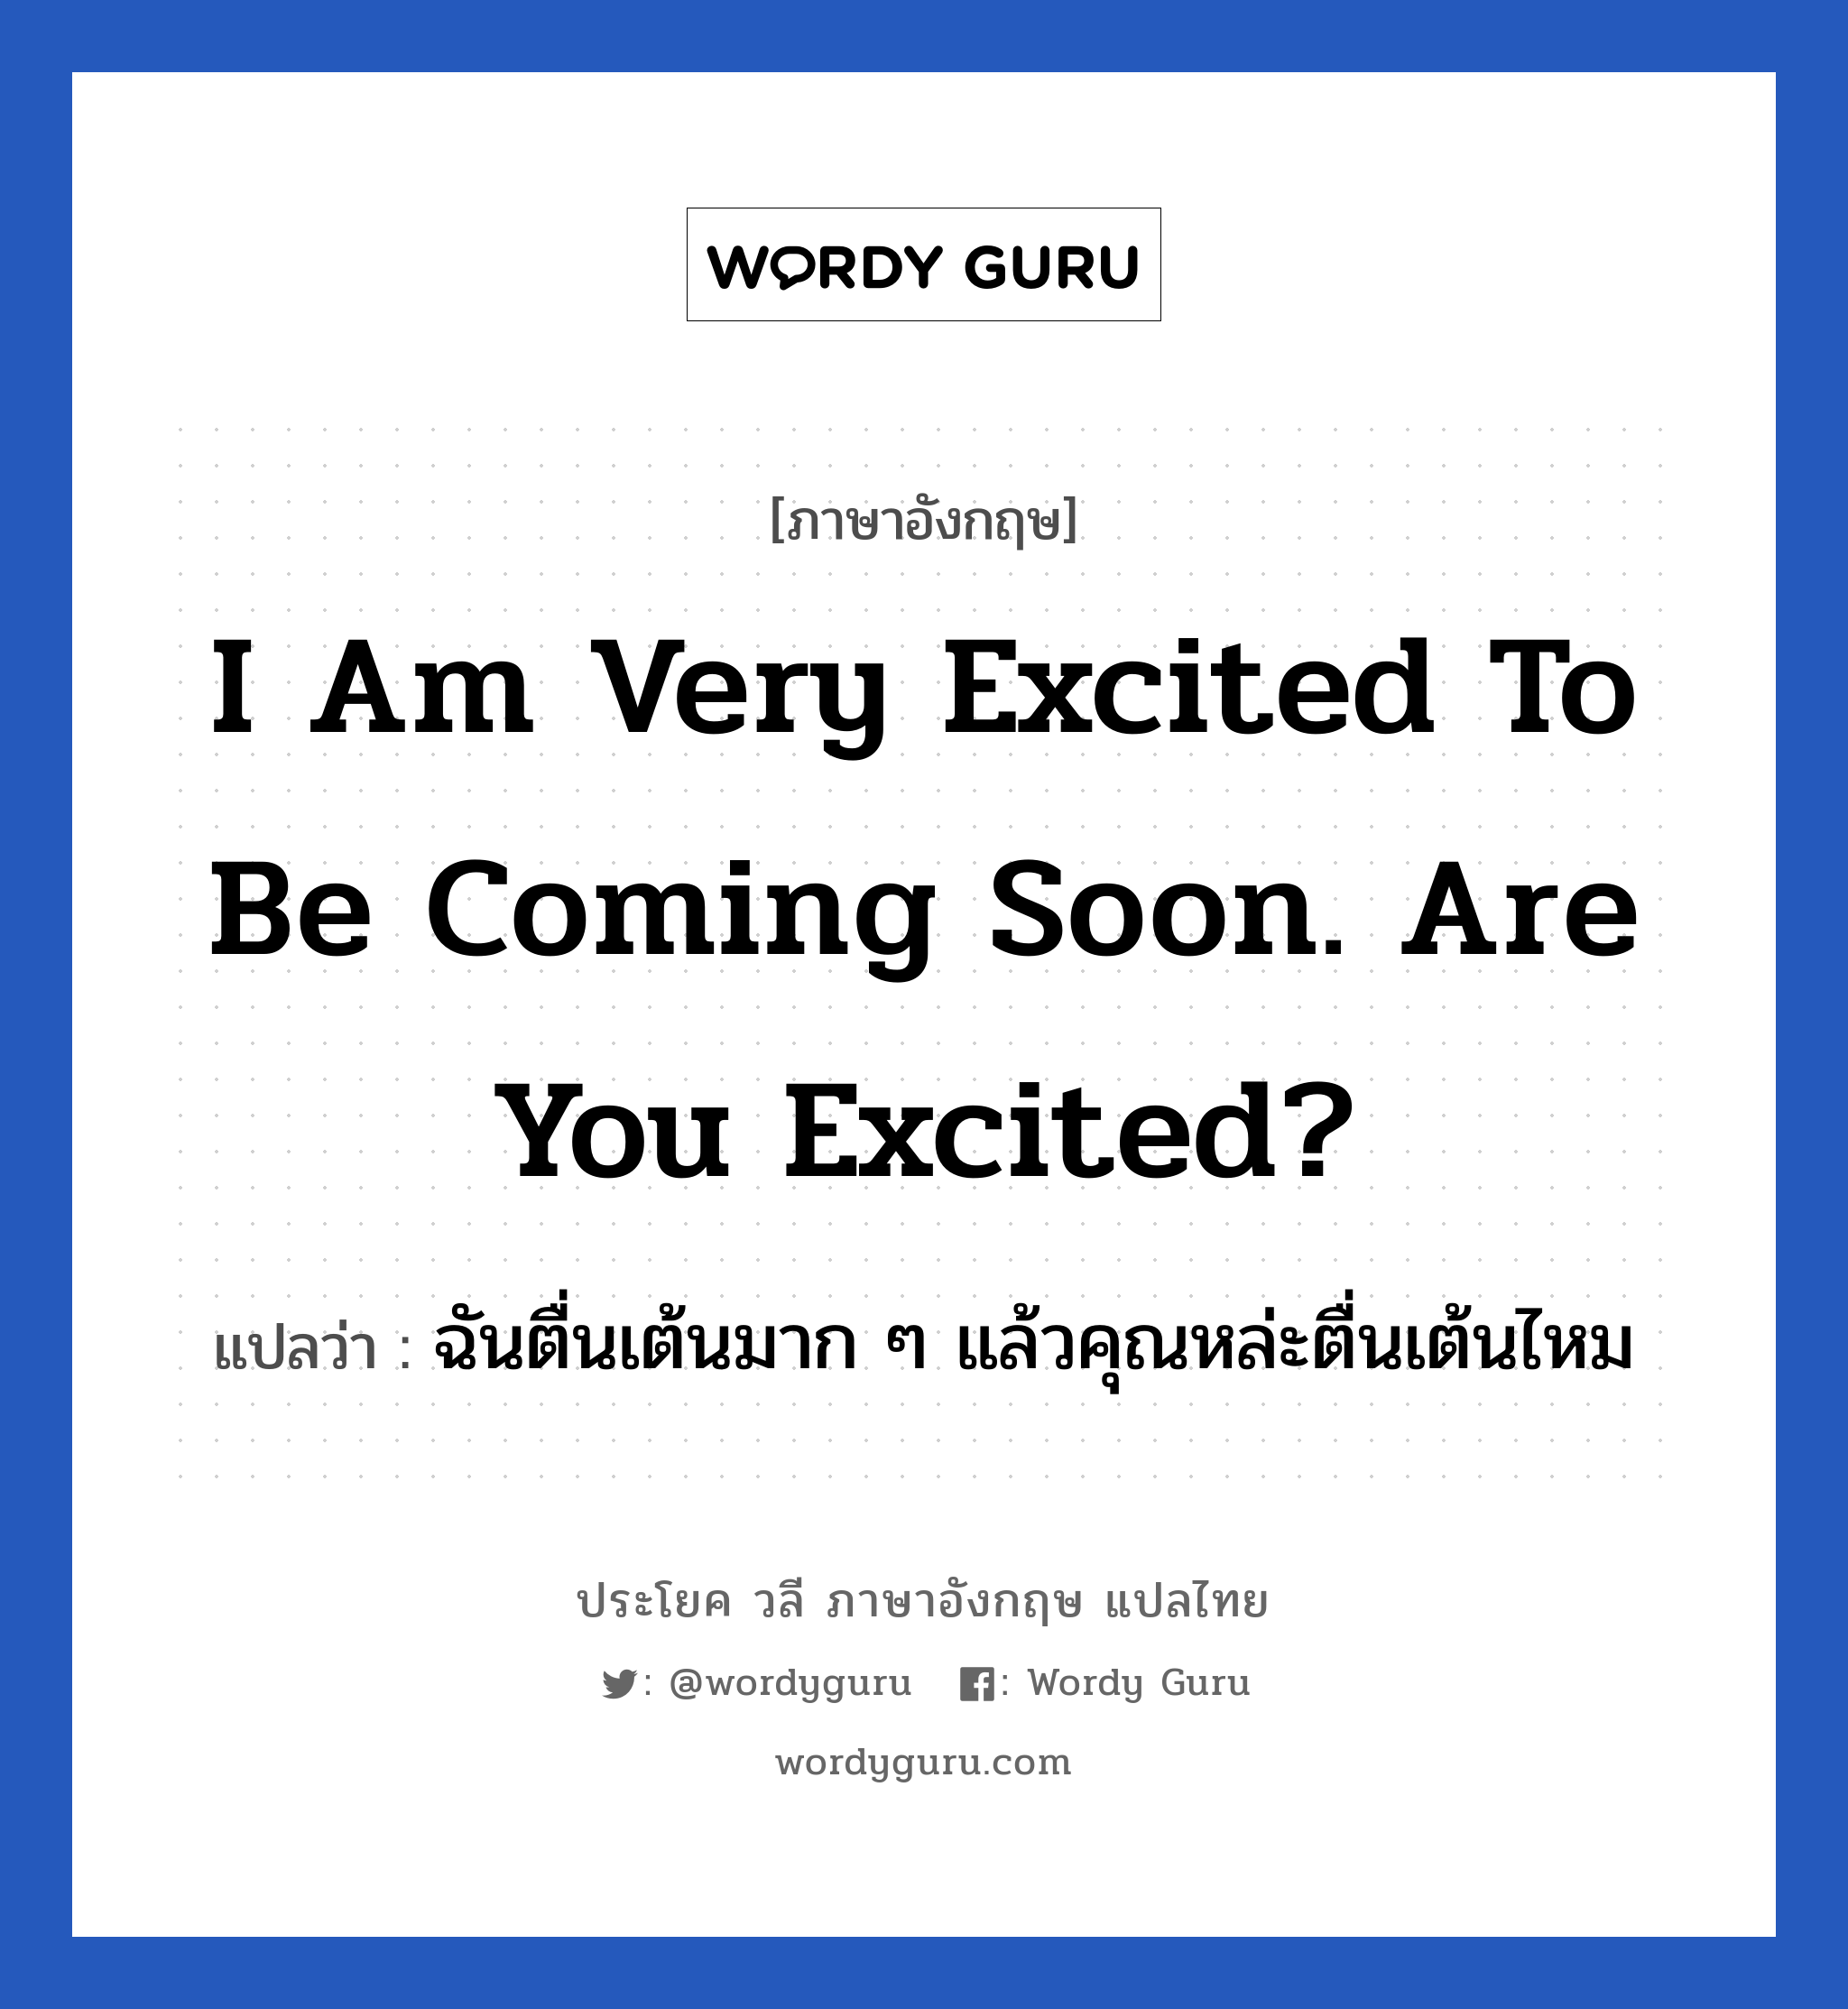 I am very excited to be coming soon. Are you excited? แปลว่า?, วลีภาษาอังกฤษ I am very excited to be coming soon. Are you excited? แปลว่า ฉันตื่นเต้นมาก ๆ แล้วคุณหล่ะตื่นเต้นไหม